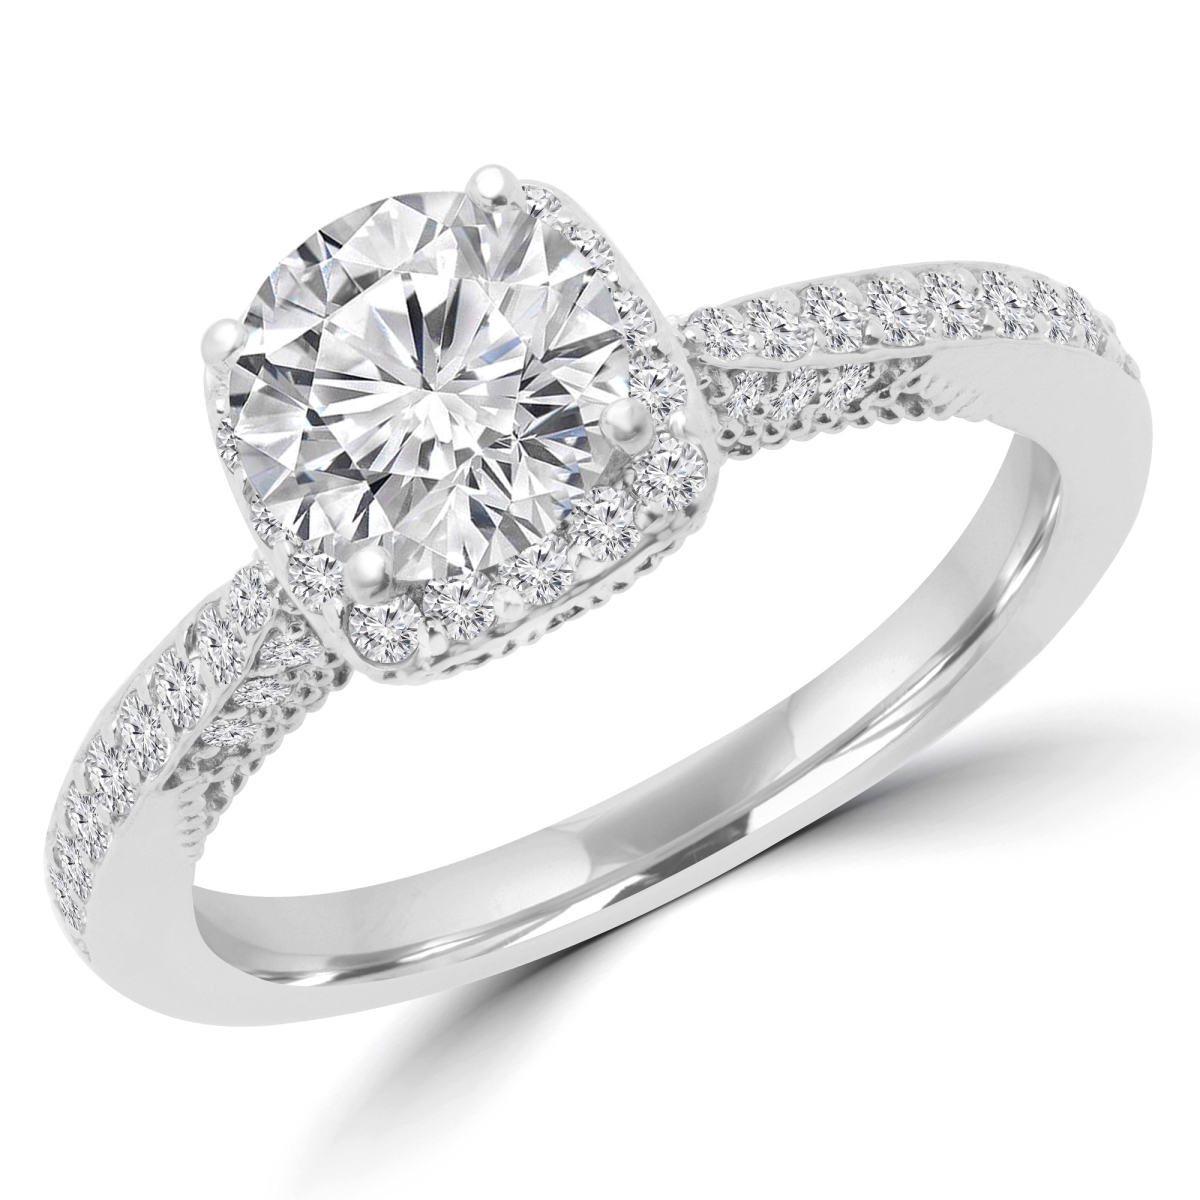 Picture of Majesty Diamonds MD180446-P 1.3 CTW Round Diamond Vintage Halo Engagement Ring in 14K White Gold